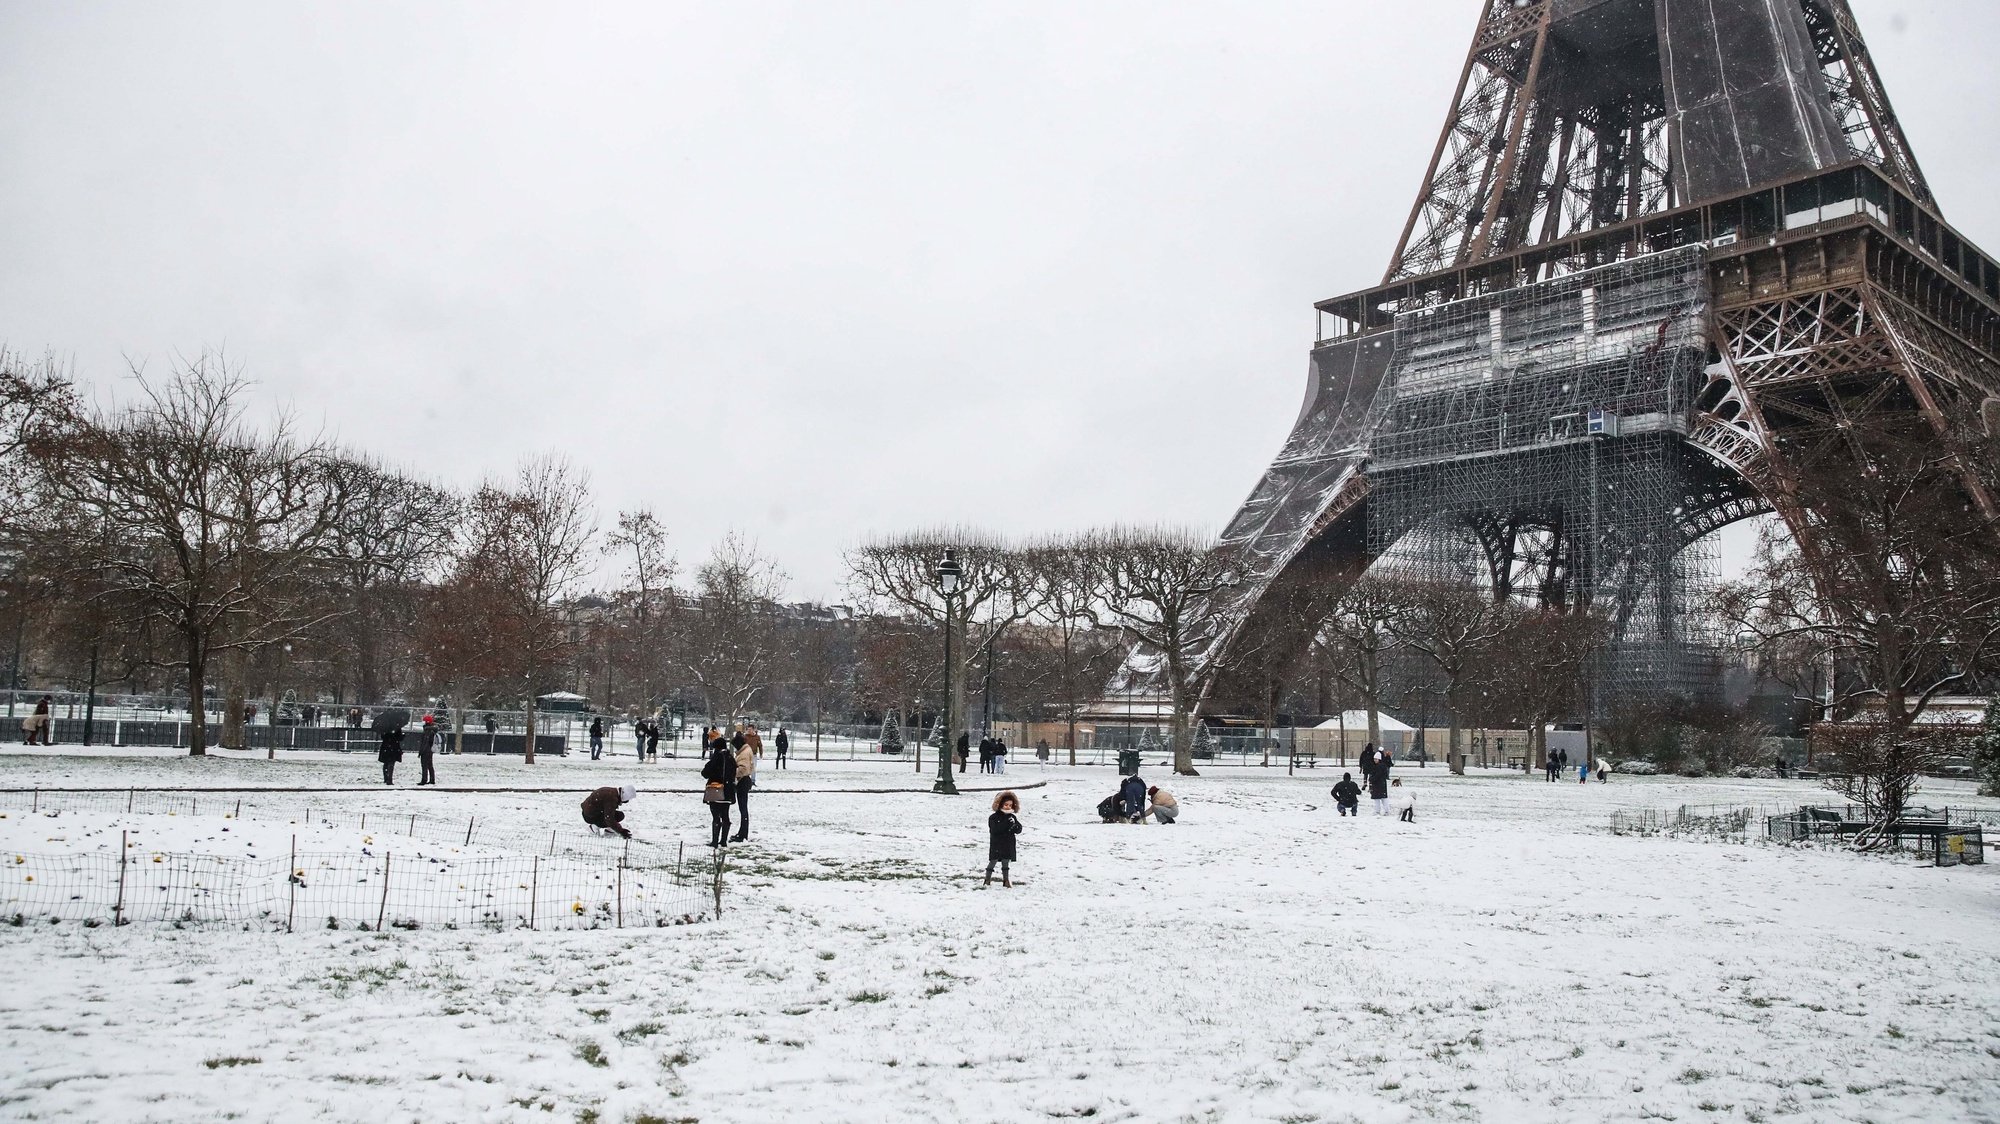 epa08941966 People play in the snow next to the Eifel Tower during snowfall in Champ de Mars, in Paris, France, 16 January 2021.  EPA/MOHAMMED BADRA